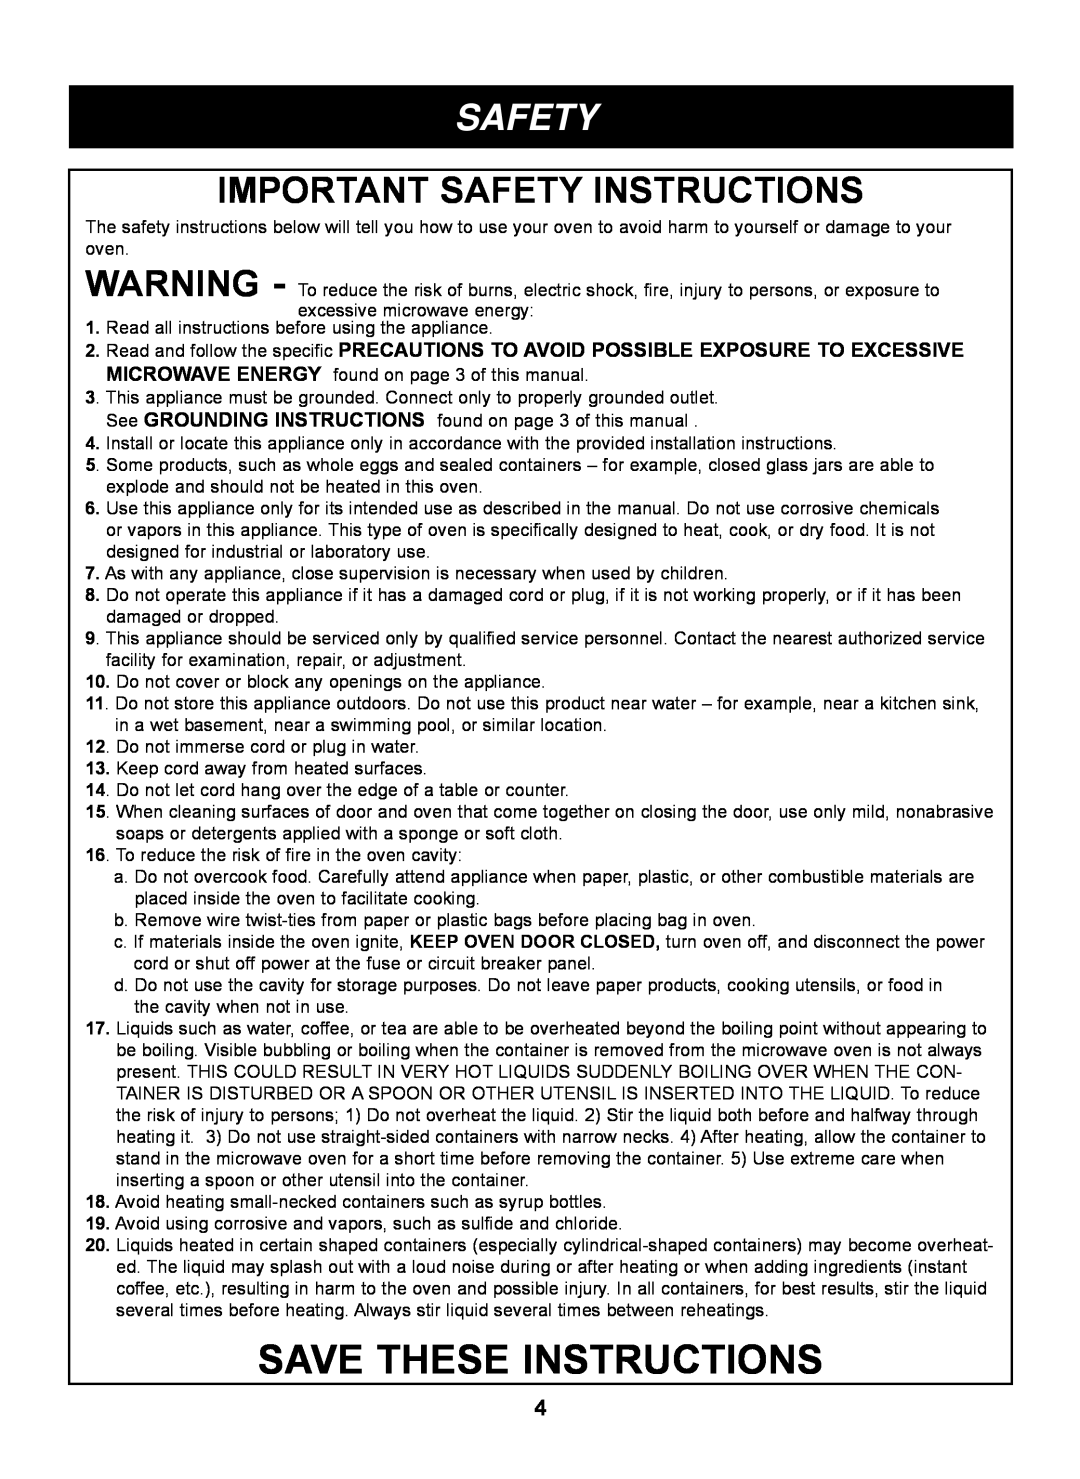 LG Electronics LRM2060ST manual Save These Instructions, Important Safety Instructions 